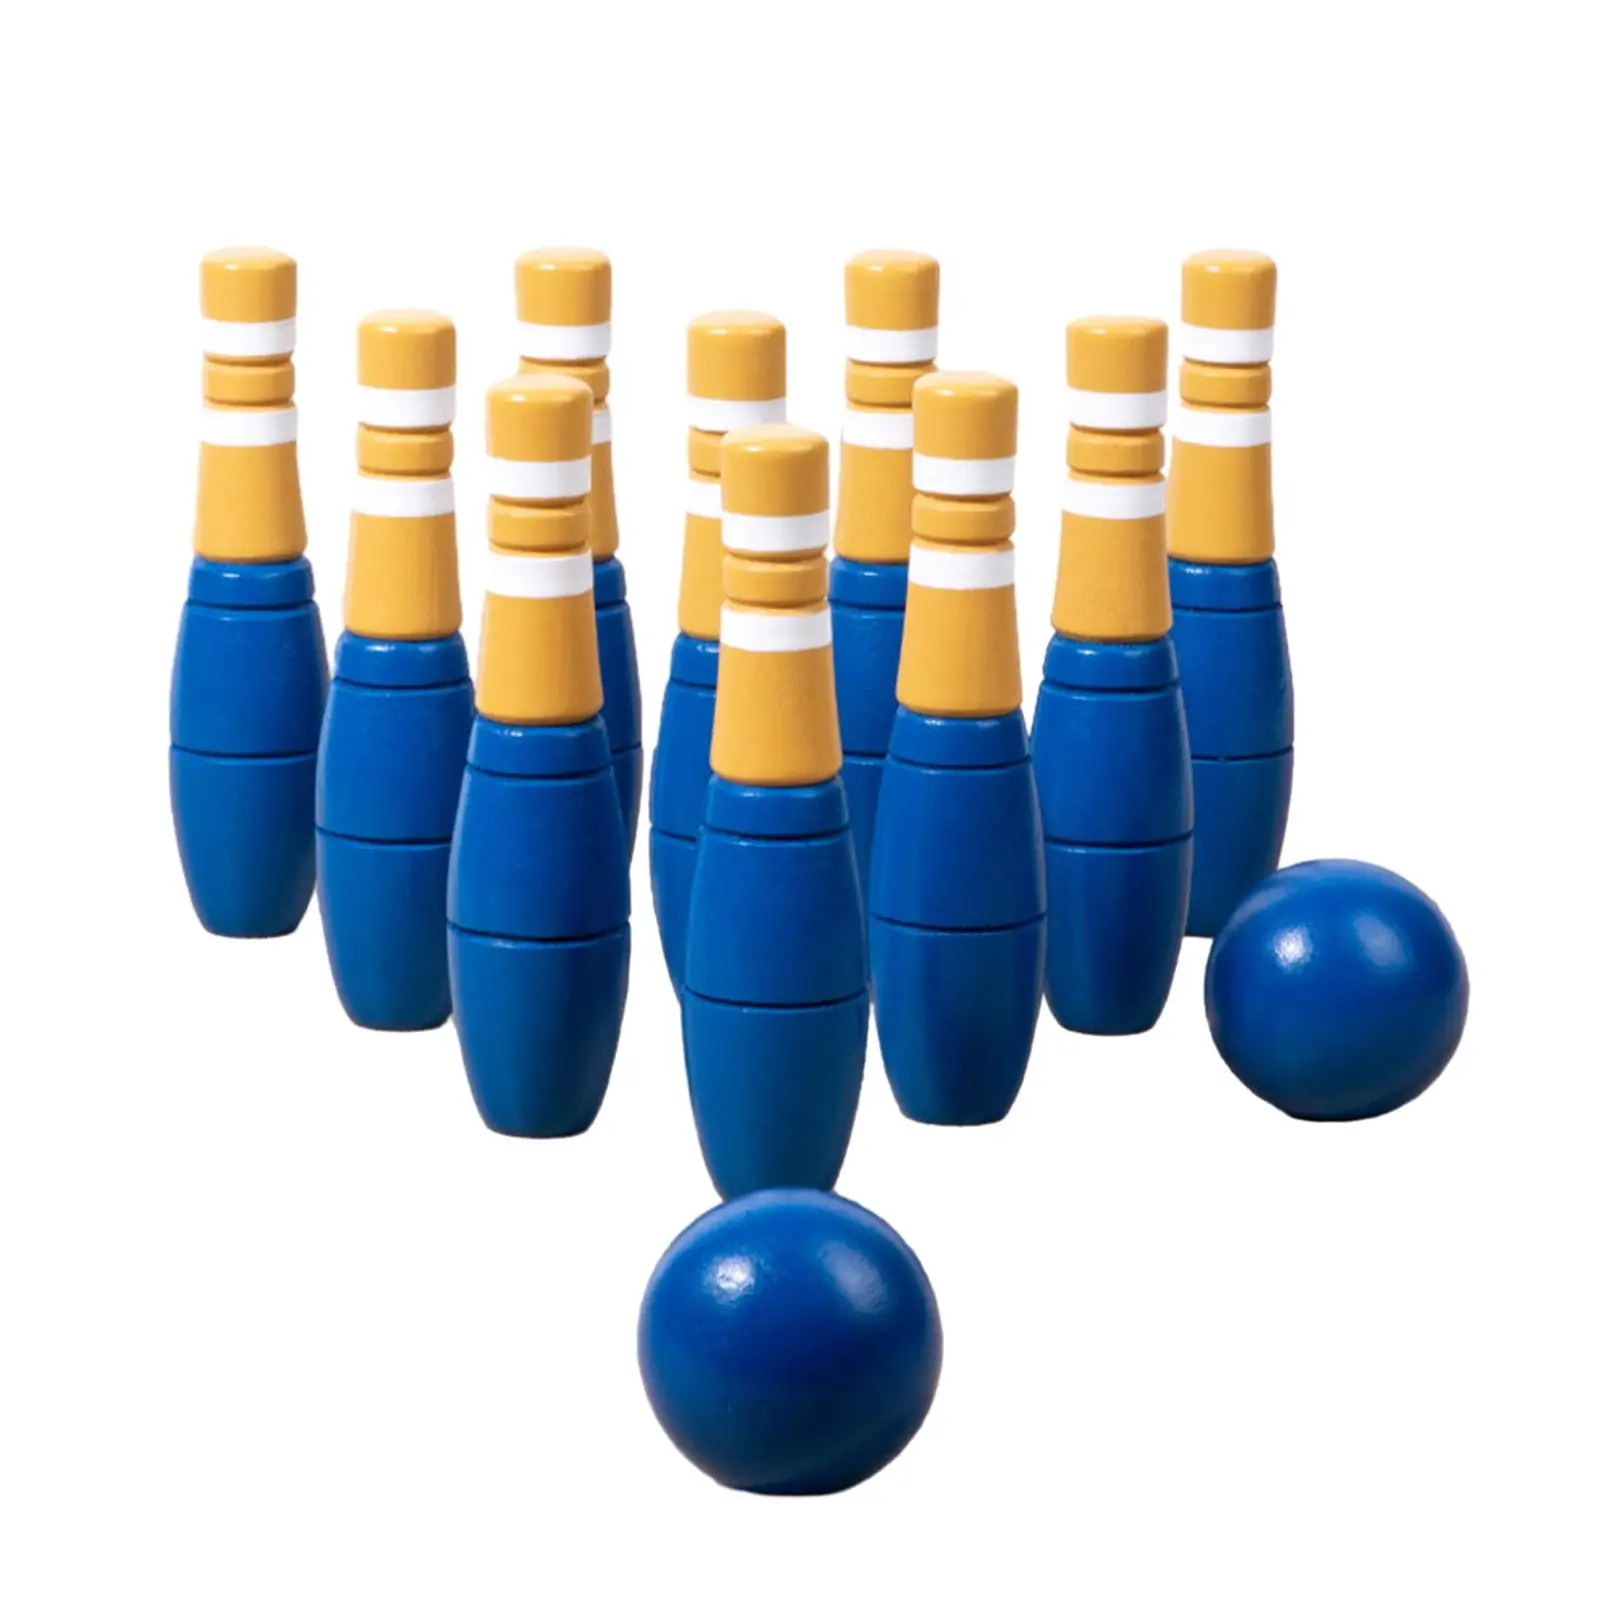 Wood Bowling Set Skittles Toys Wood Bowling Game Props for Indoor Lawn Gifts